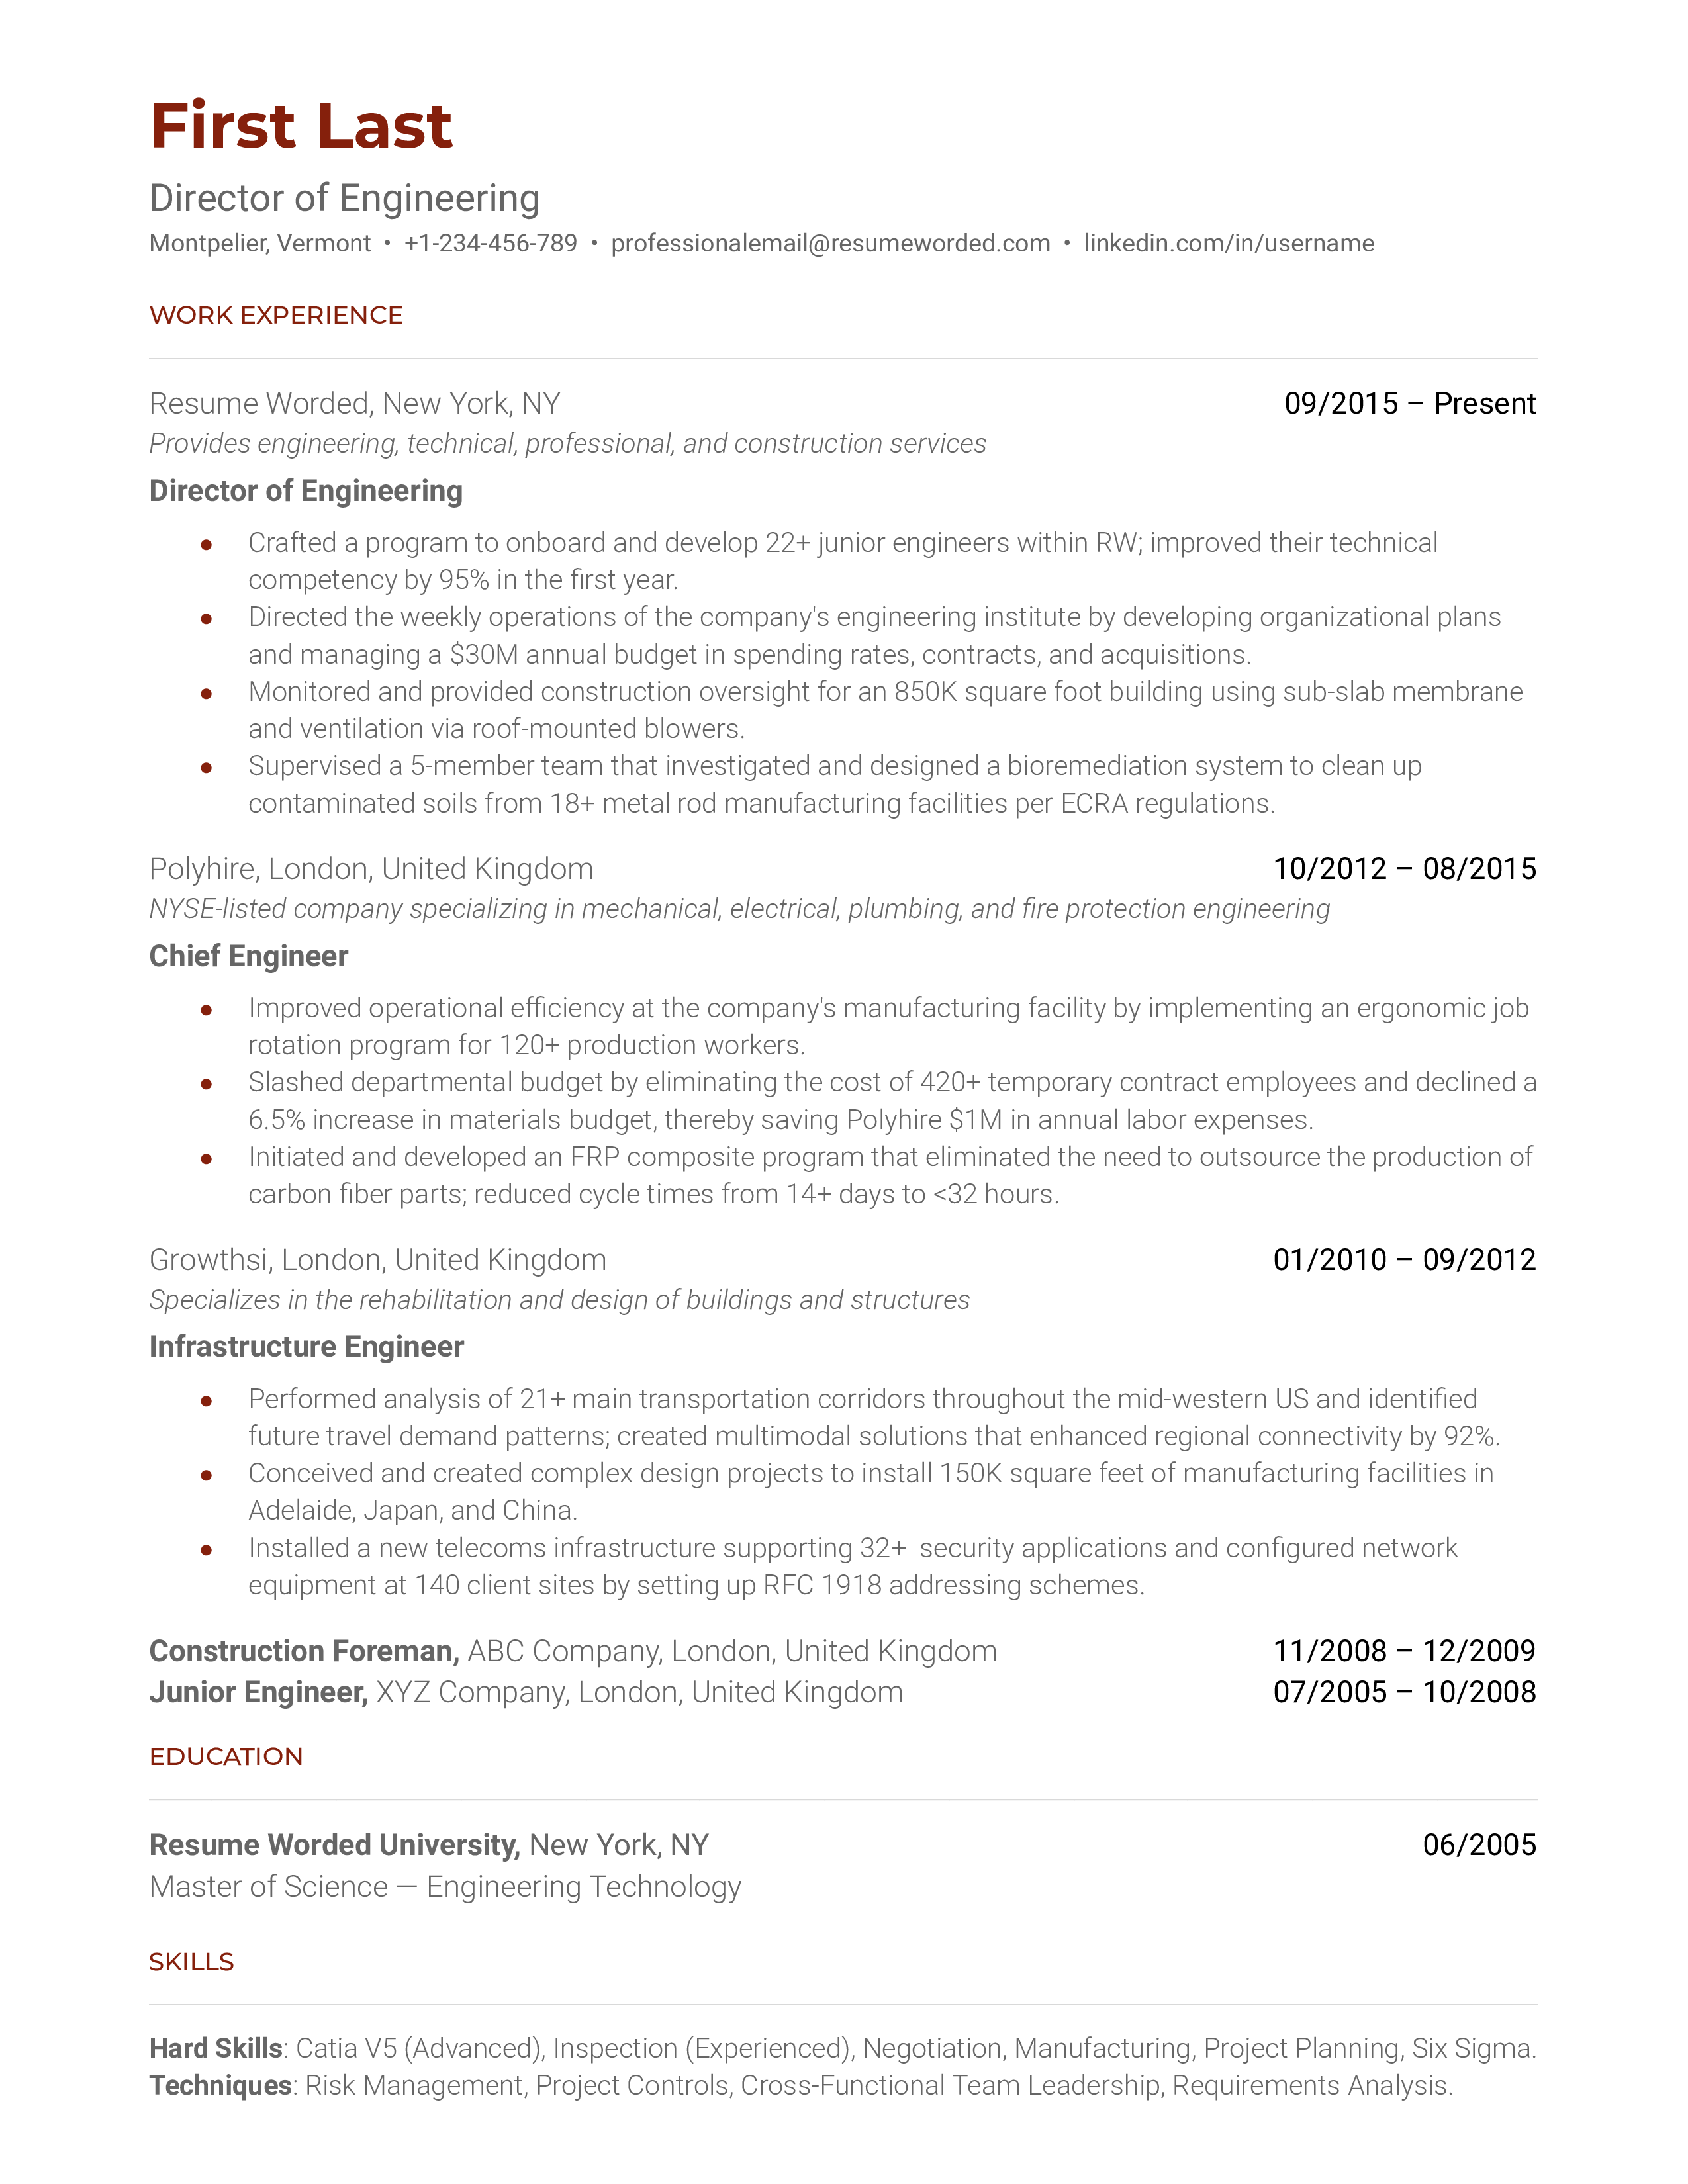 A director of engineering resume template using relevant metrics.